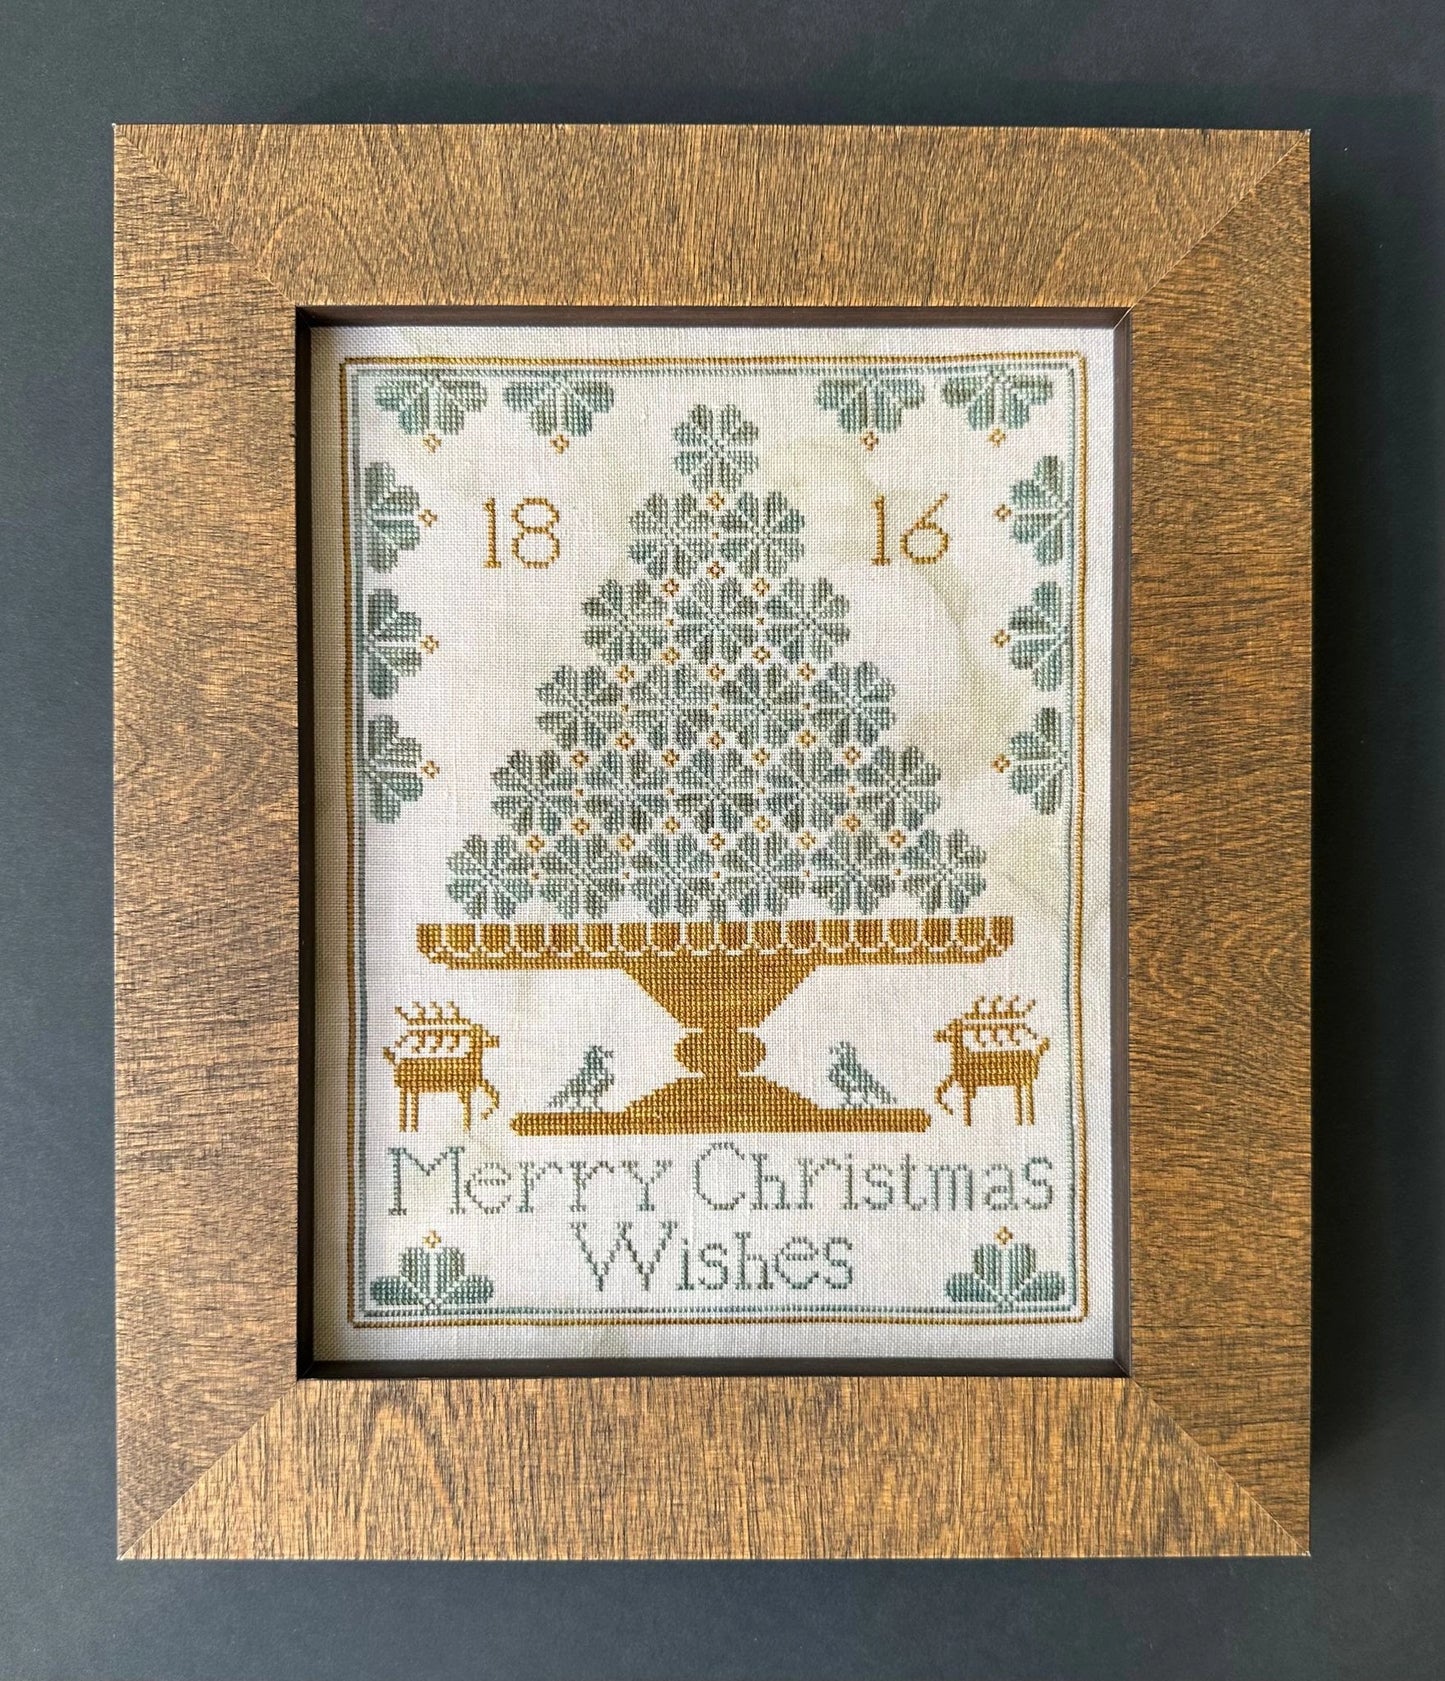 Merry Christmas Wishes Cross Stitch Pattern Kathy Barrick PHYSICAL copy